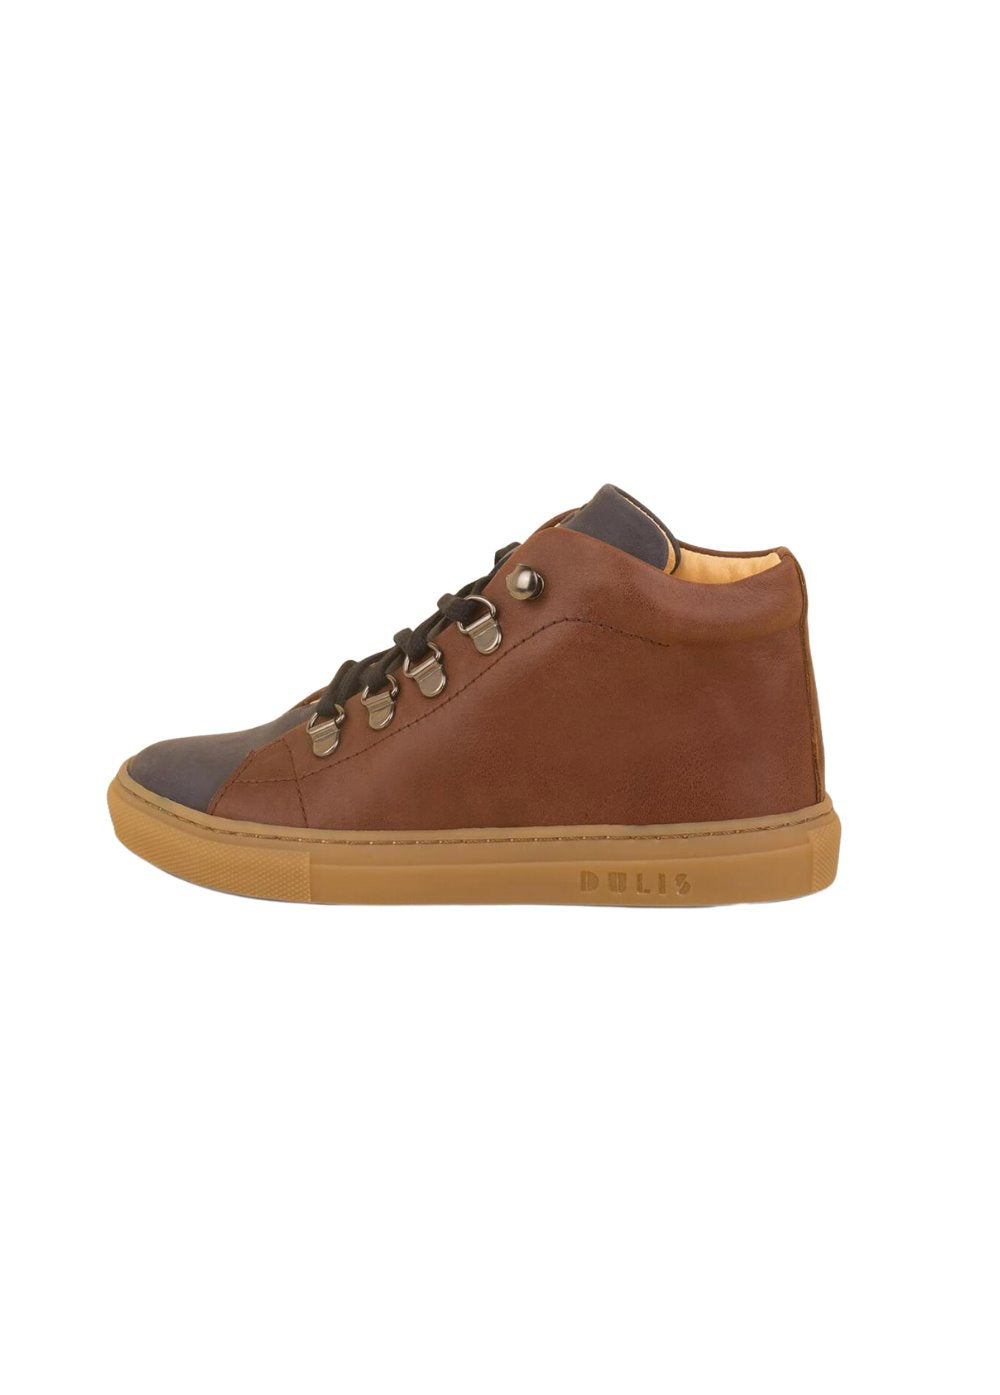 Navy/Brown Mid Sneakers Shoes Dulis Shoes 